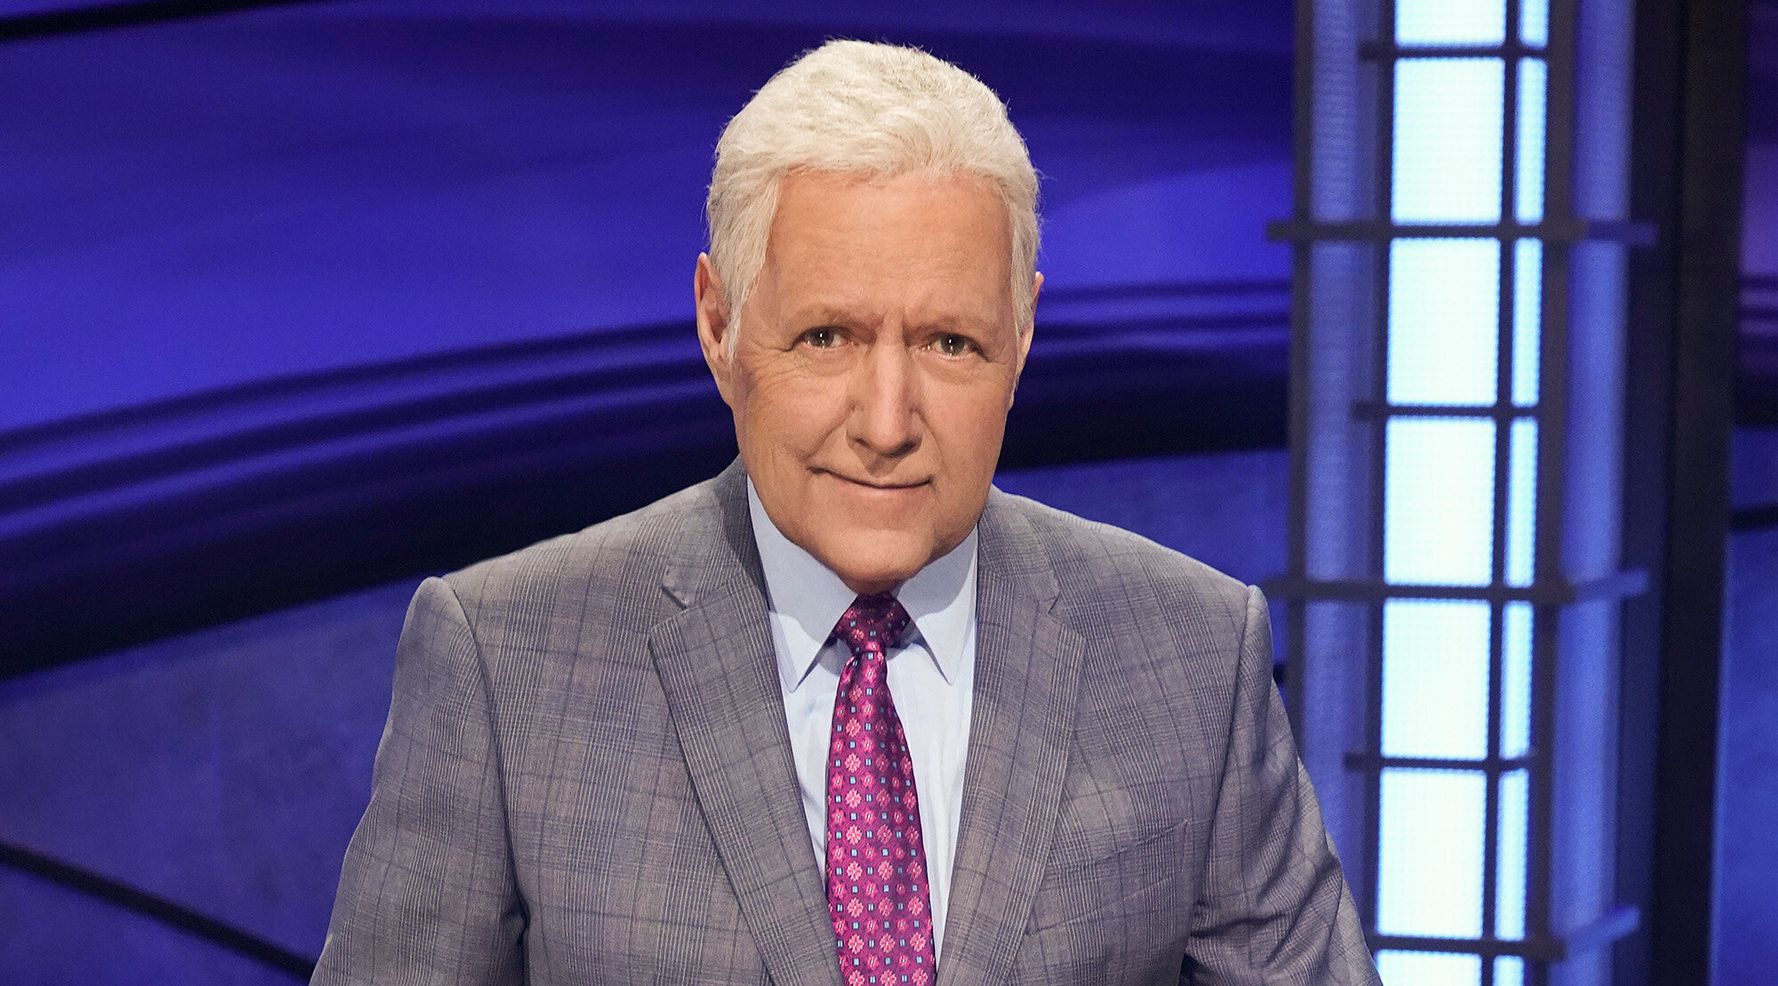 One Of Alex Trebek's Greatest Gifts Was Connecting Grandkids And Grandparents